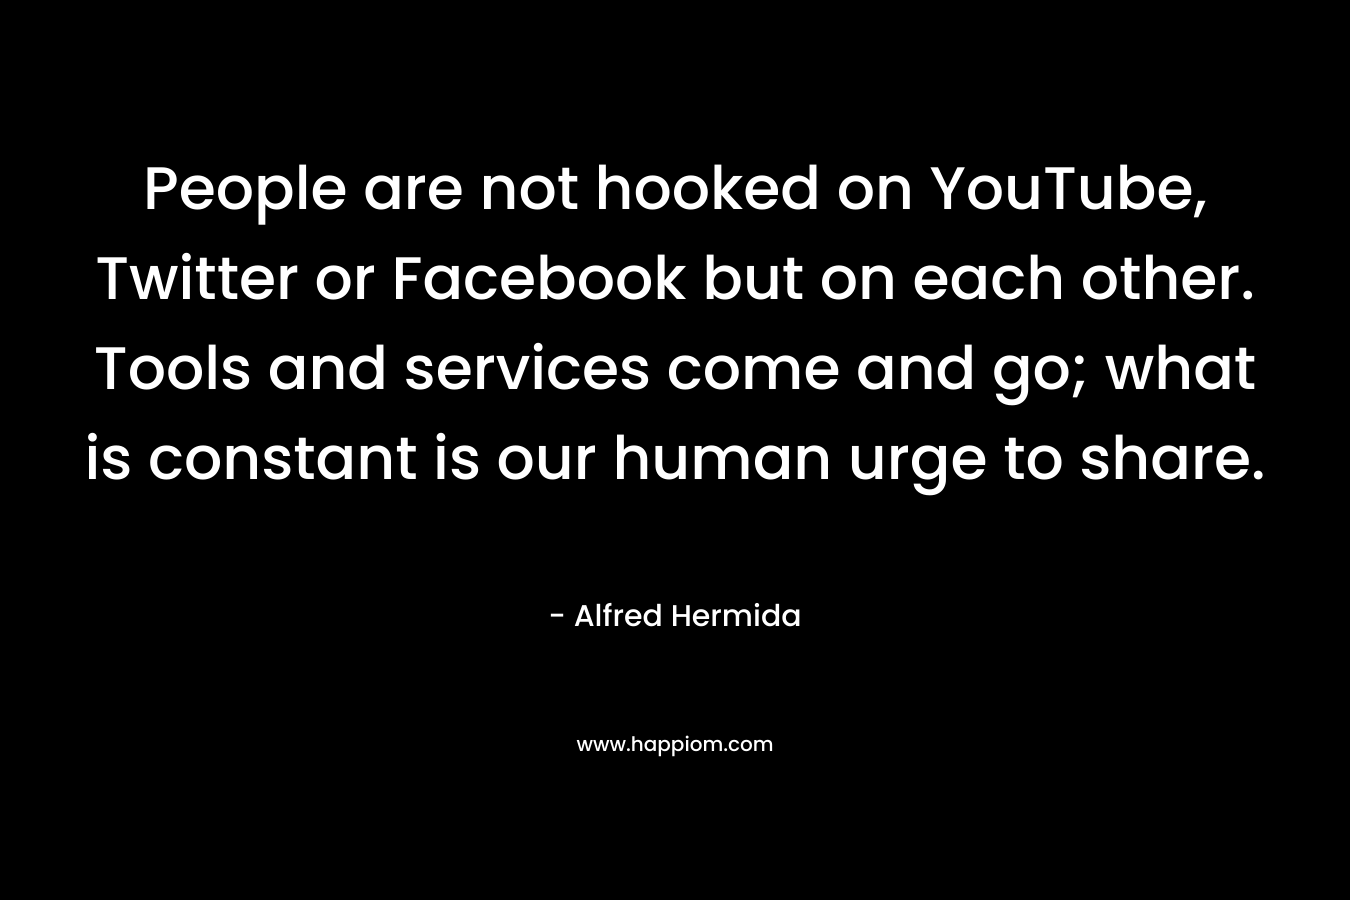 People are not hooked on YouTube, Twitter or Facebook but on each other. Tools and services come and go; what is constant is our human urge to share.